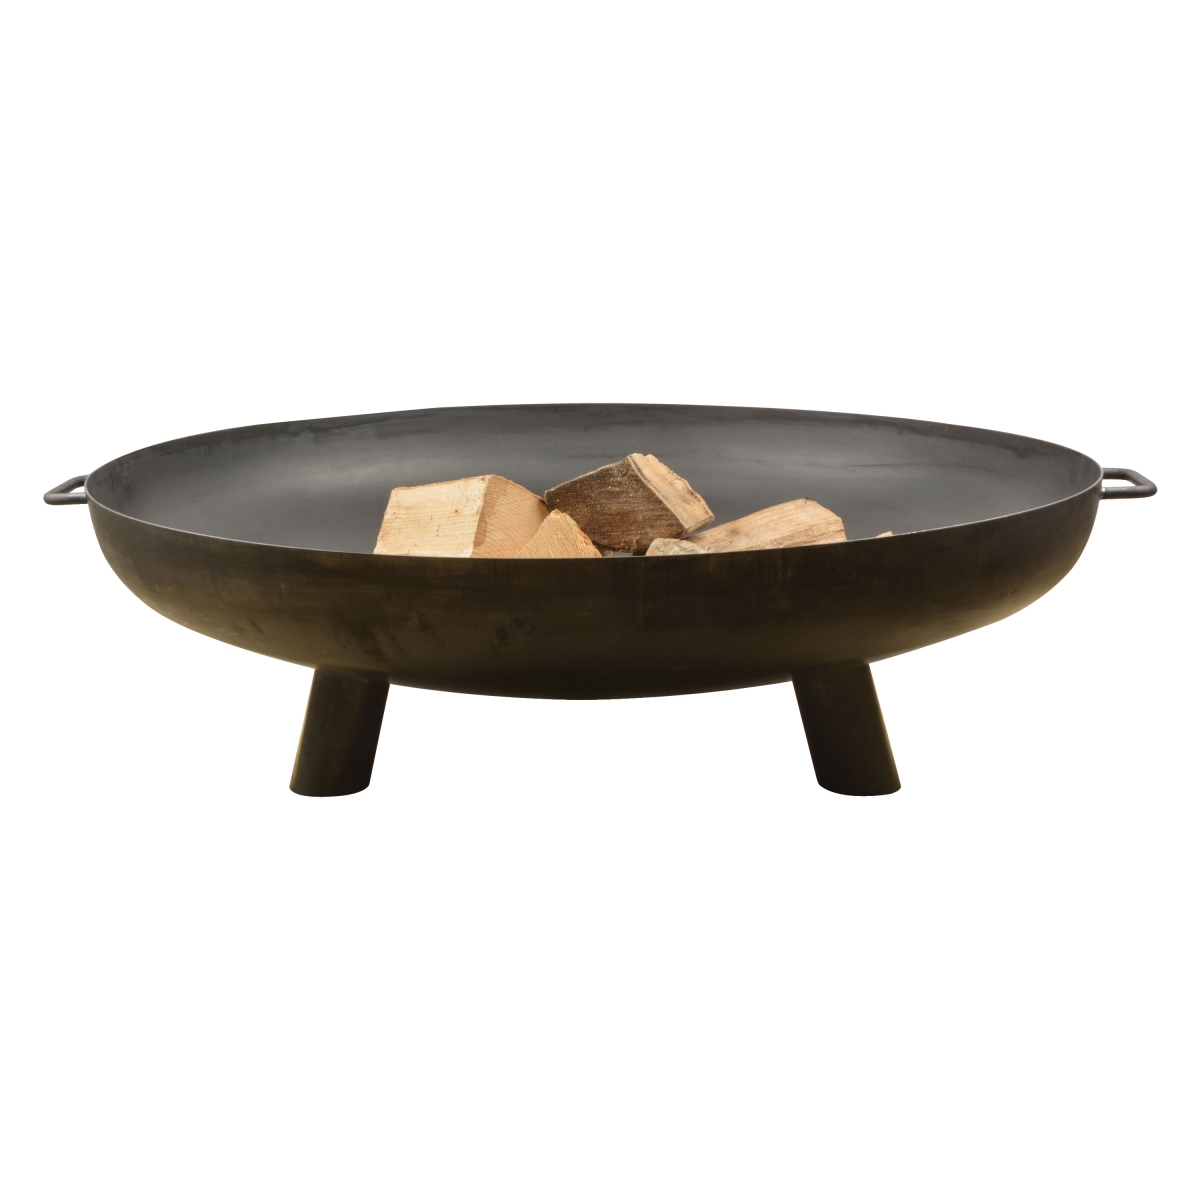 Ff244 Steel Fire Bowl With Legs & Handles, Black - Extra Large